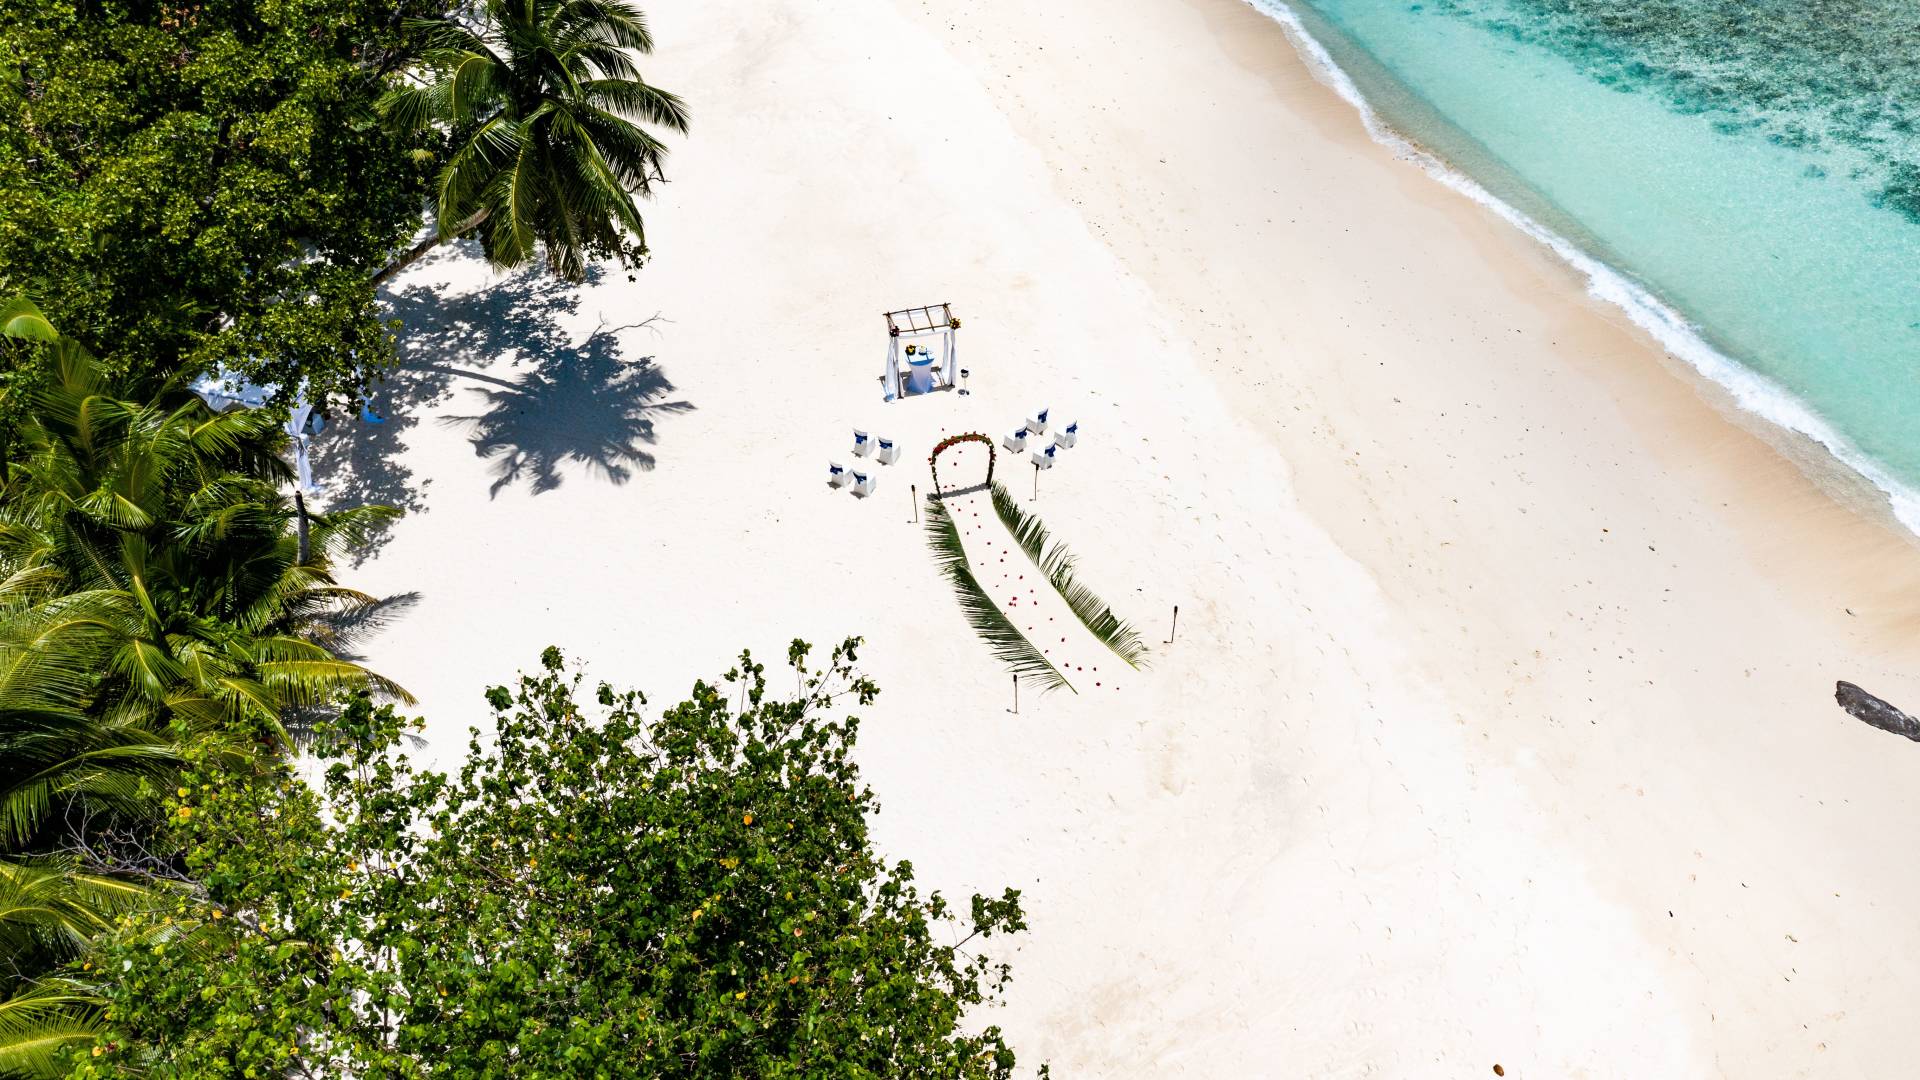 Aerial View of a Wedding Celebration at the Beach